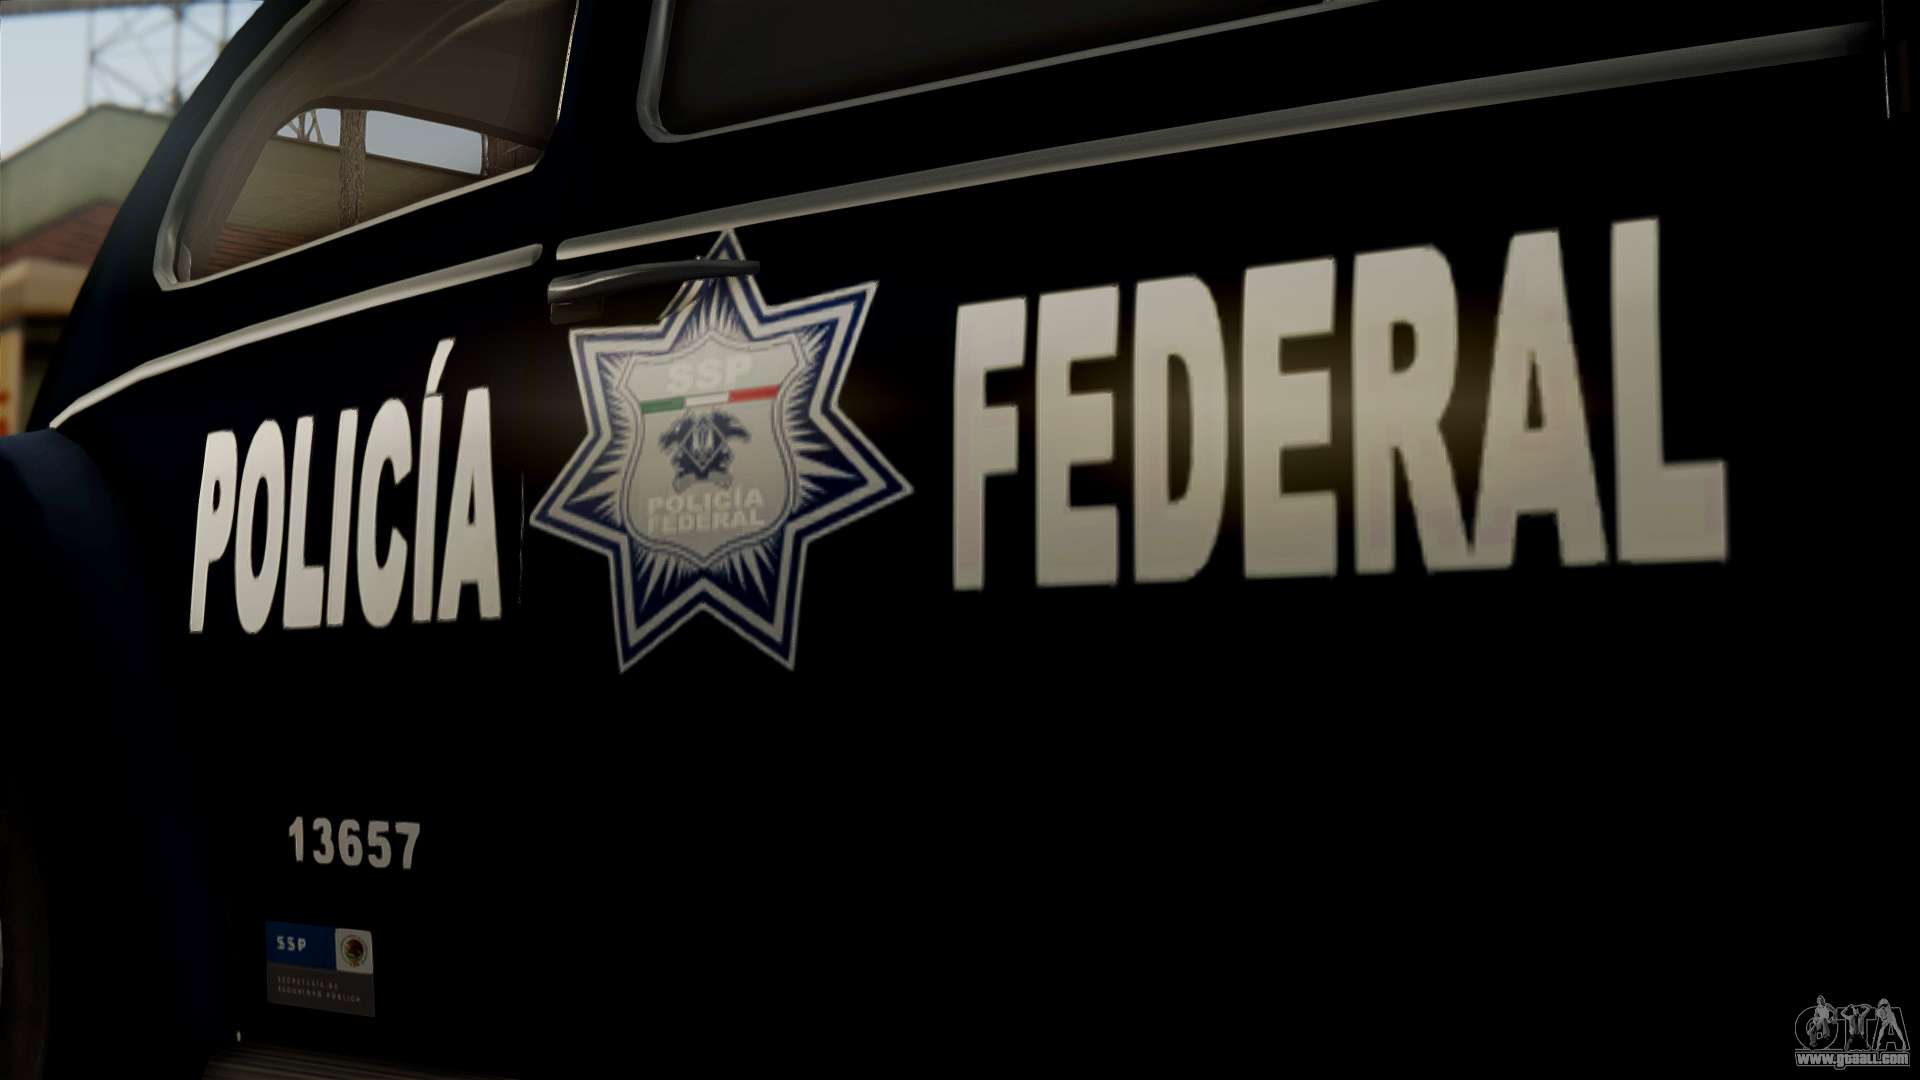 Policia Federal Full Hd , HD Wallpaper & Backgrounds